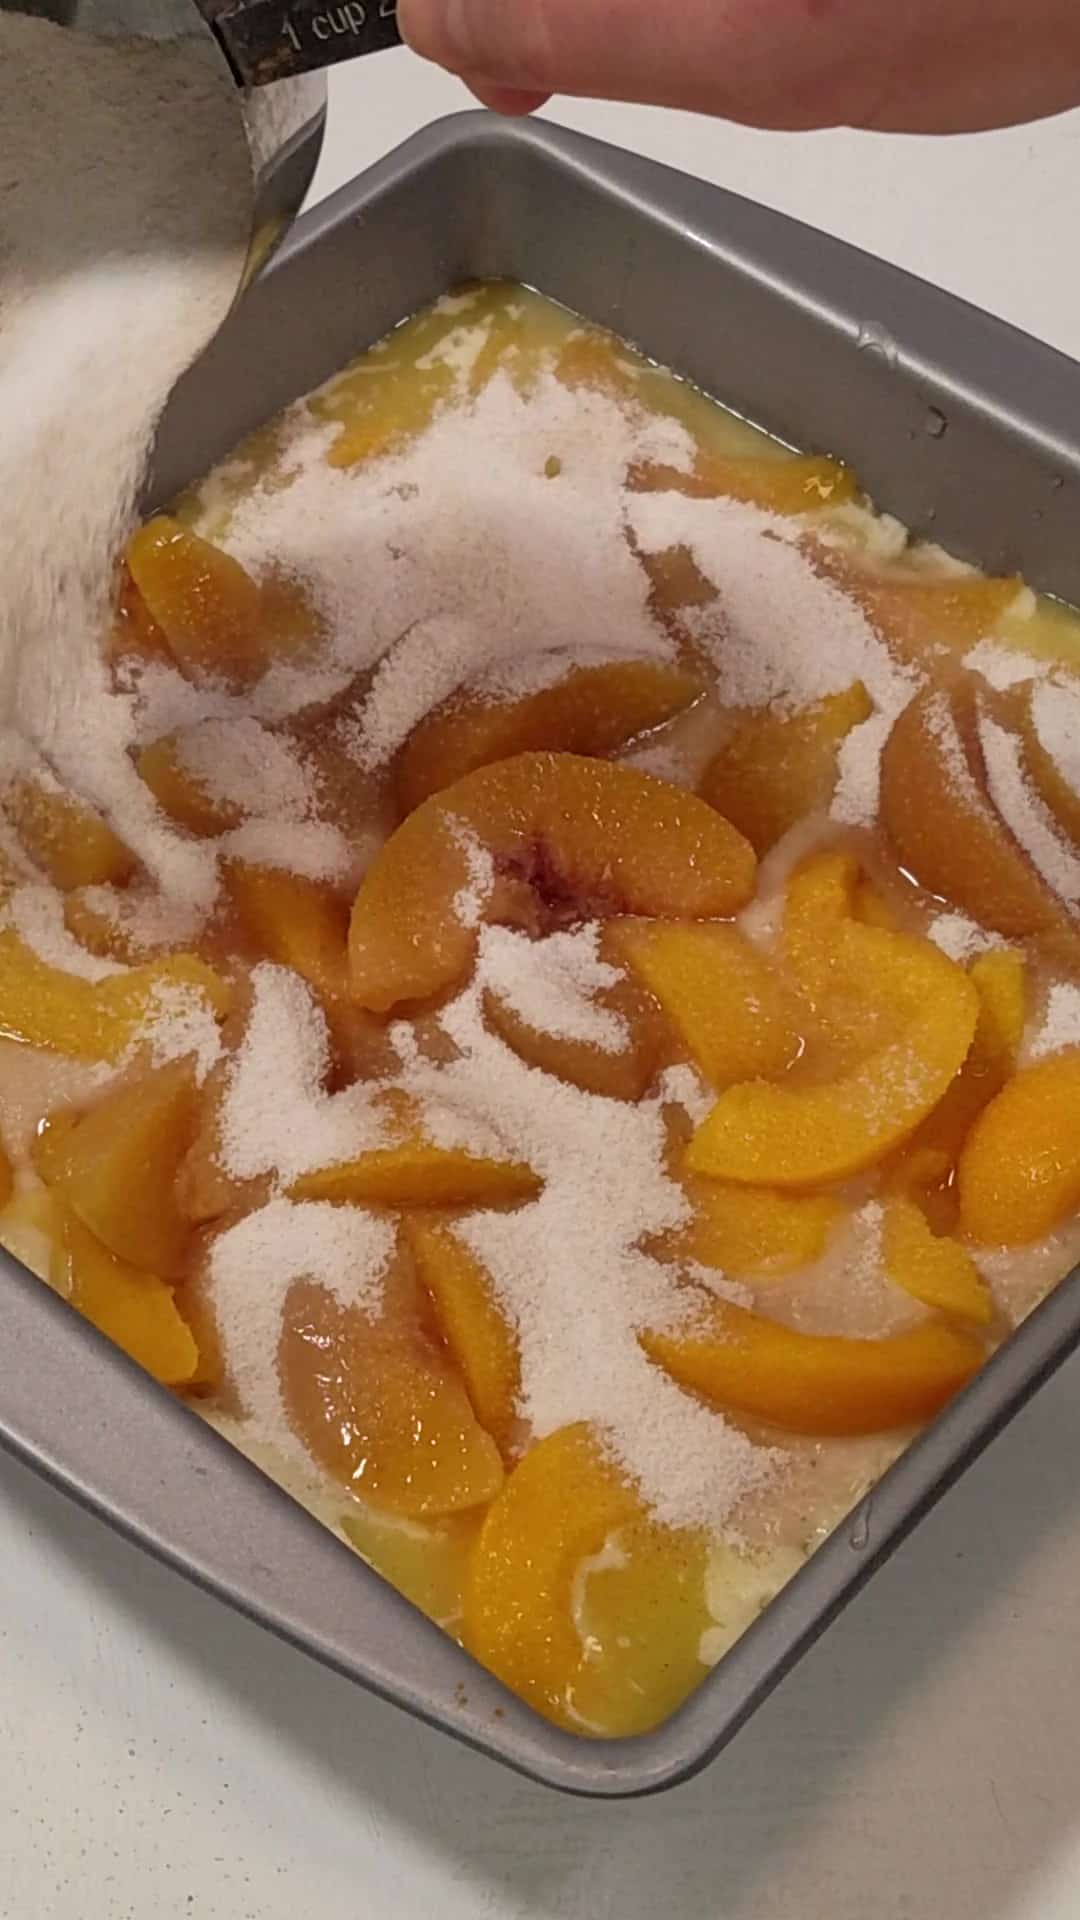 sugar-cinnamon mixture sprinkled on top of the layers of peach cobbler.